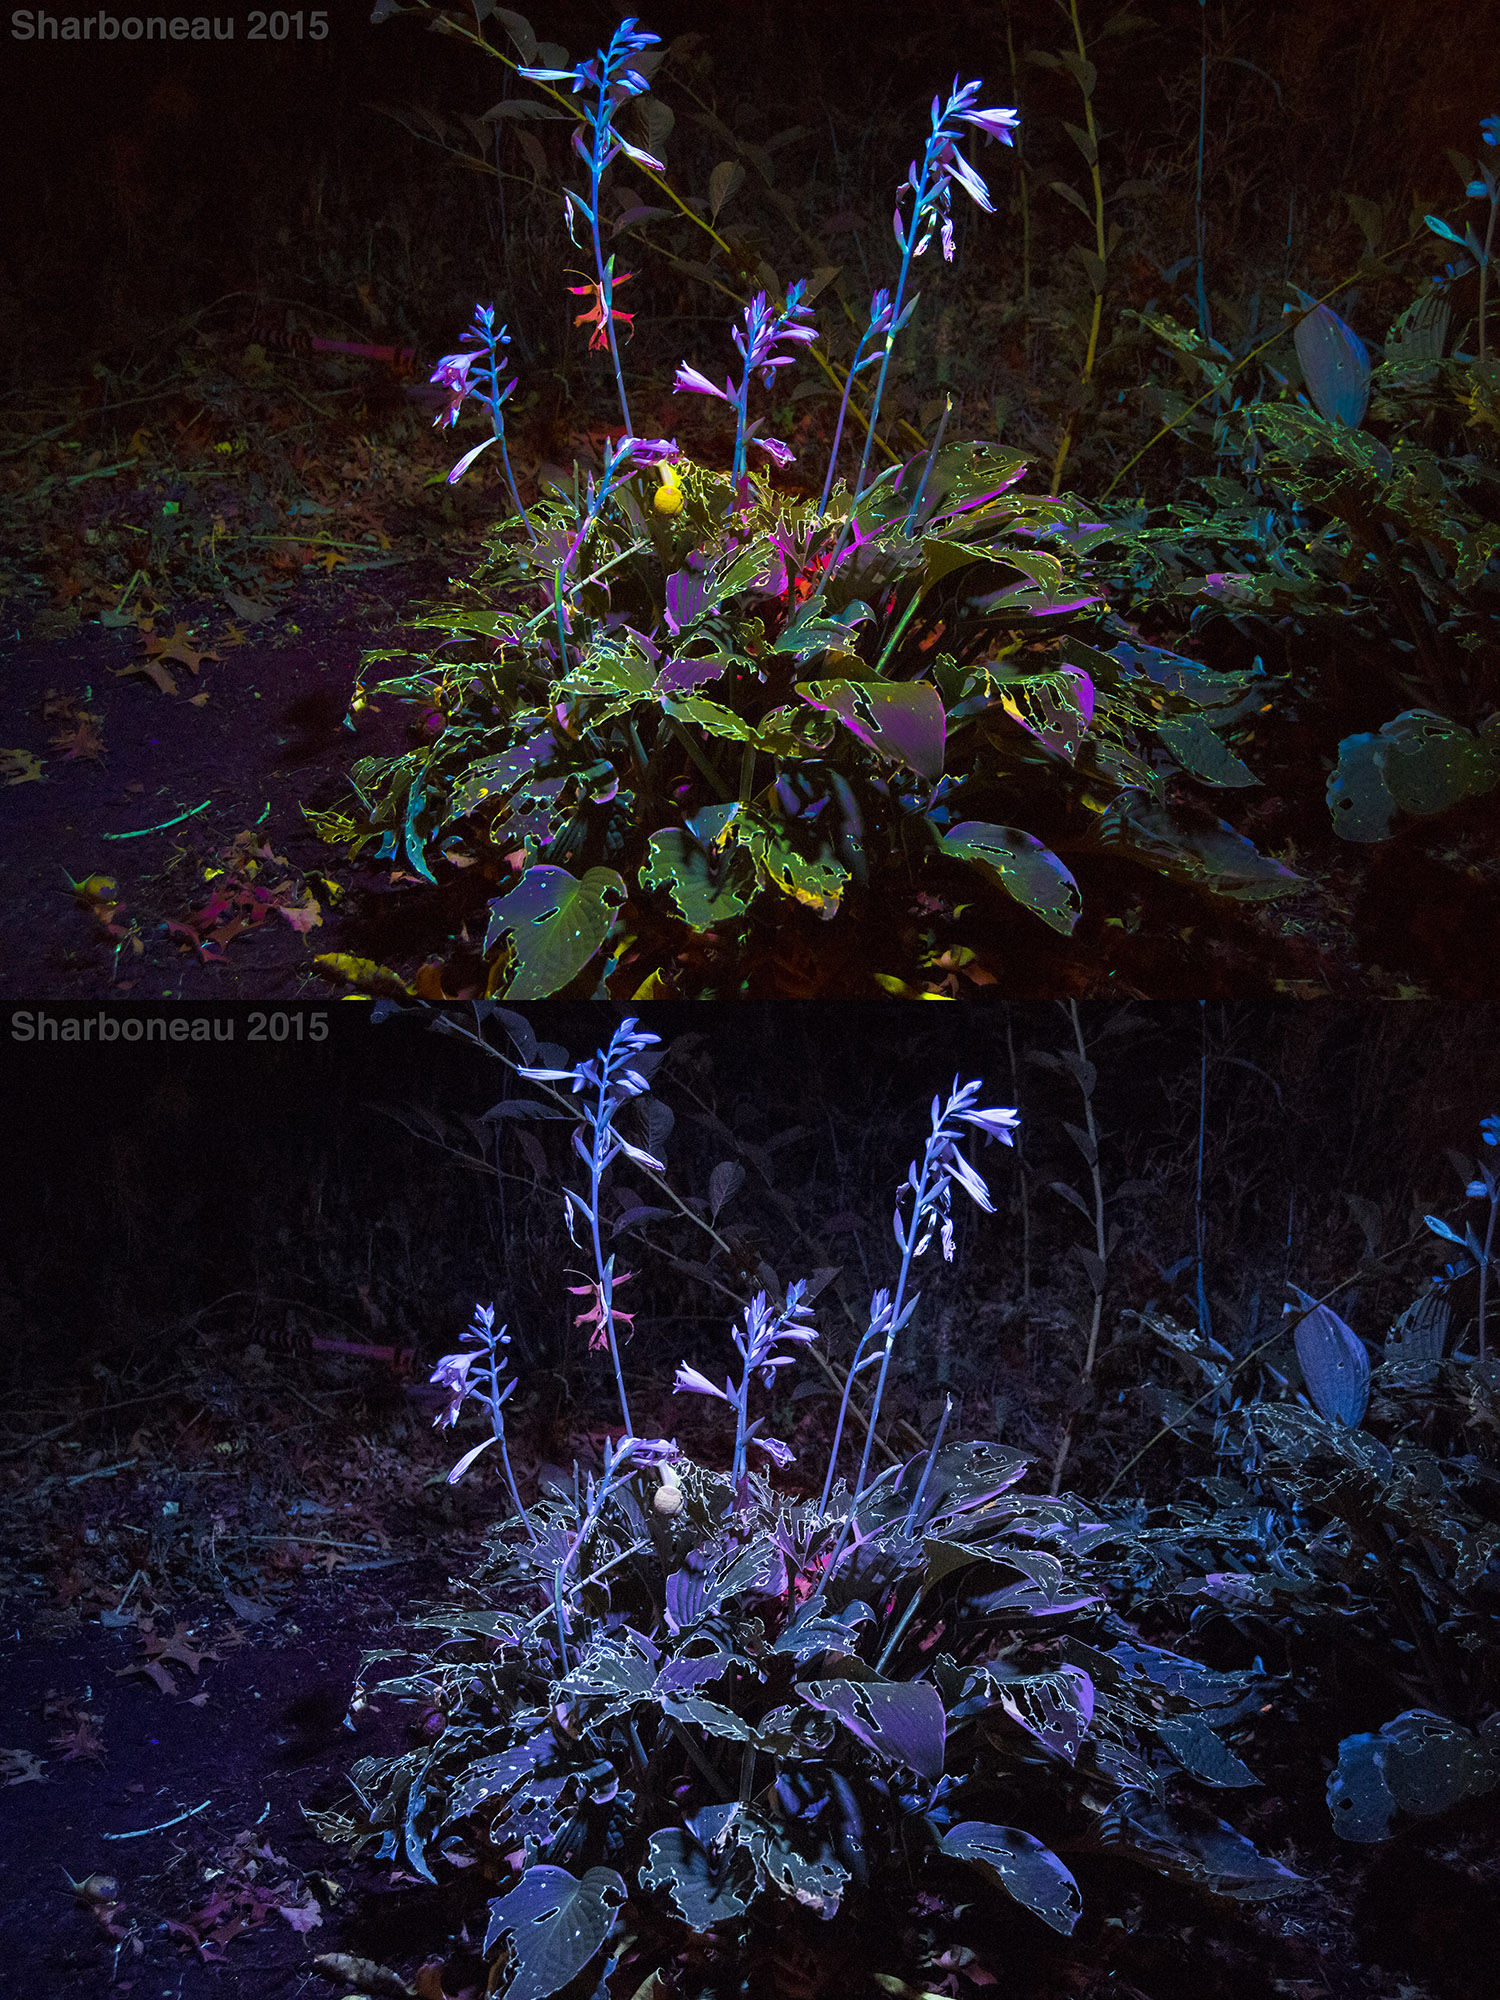 Here are two photographs showing two different white balance standards I use. The top image has a warmer custom white balance (~10,000K), while the bottom image has the white balance set to Daylight (~5,00K). 